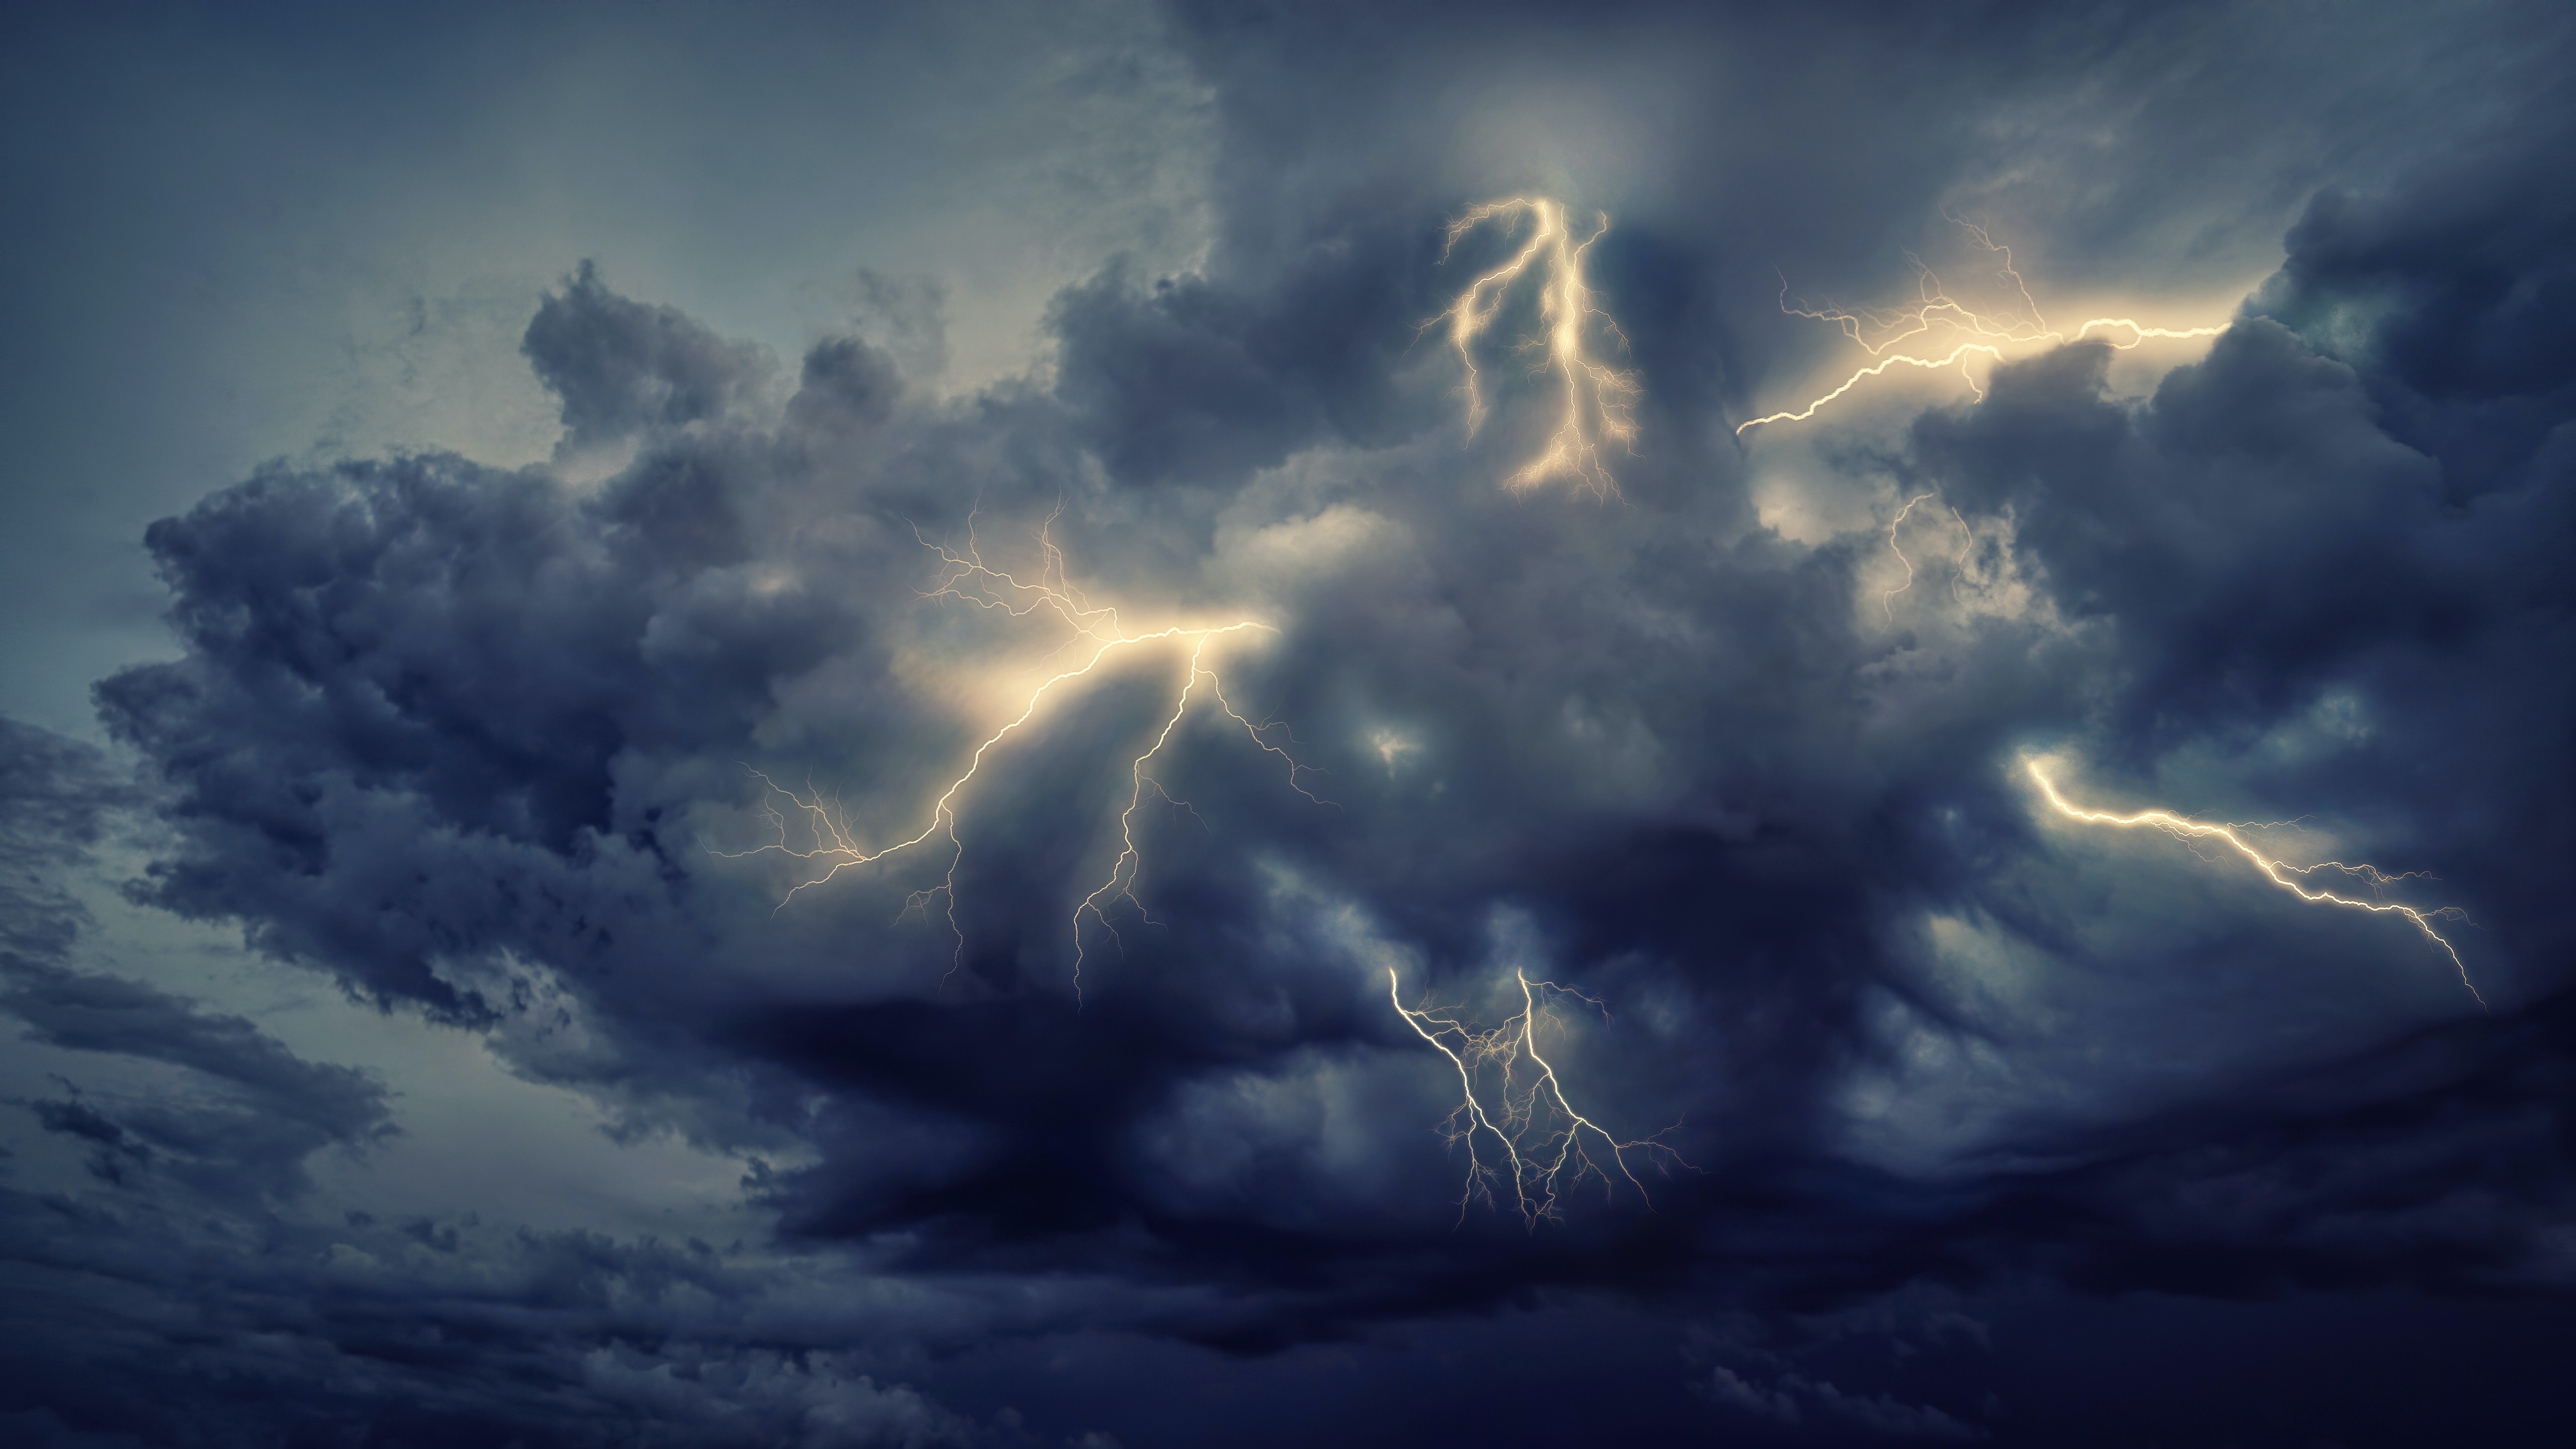 Best Mobile Storm Backgrounds